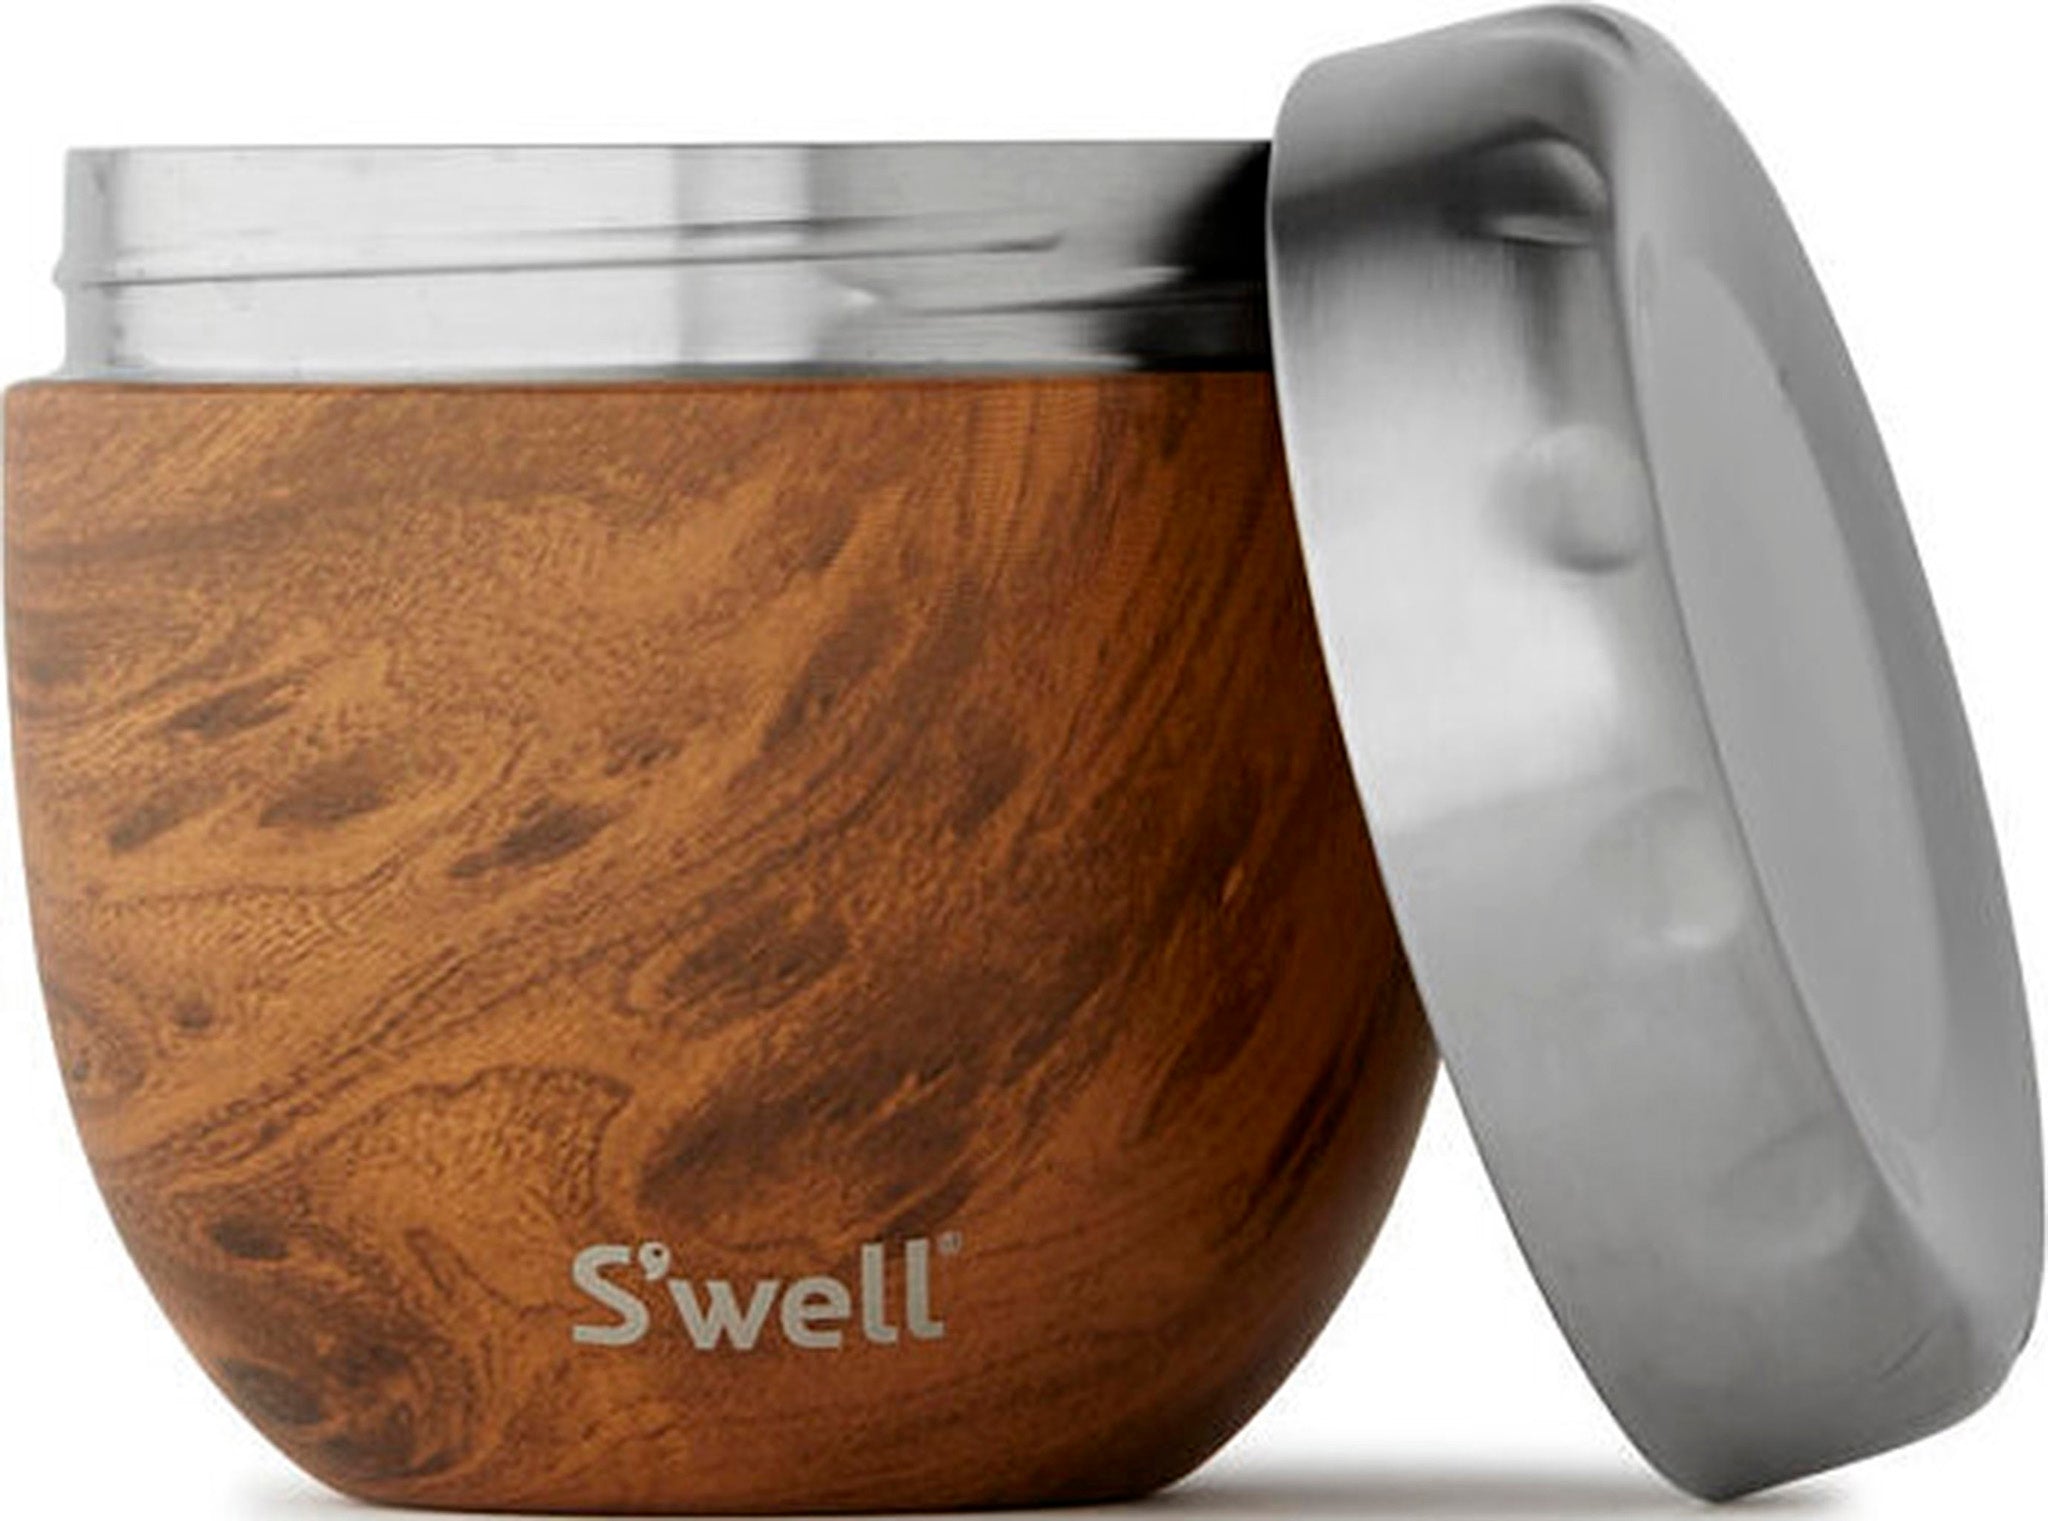 S'well Wood S'well,Stainless Steel Eats 2-in-1 Nesting Food Bowls